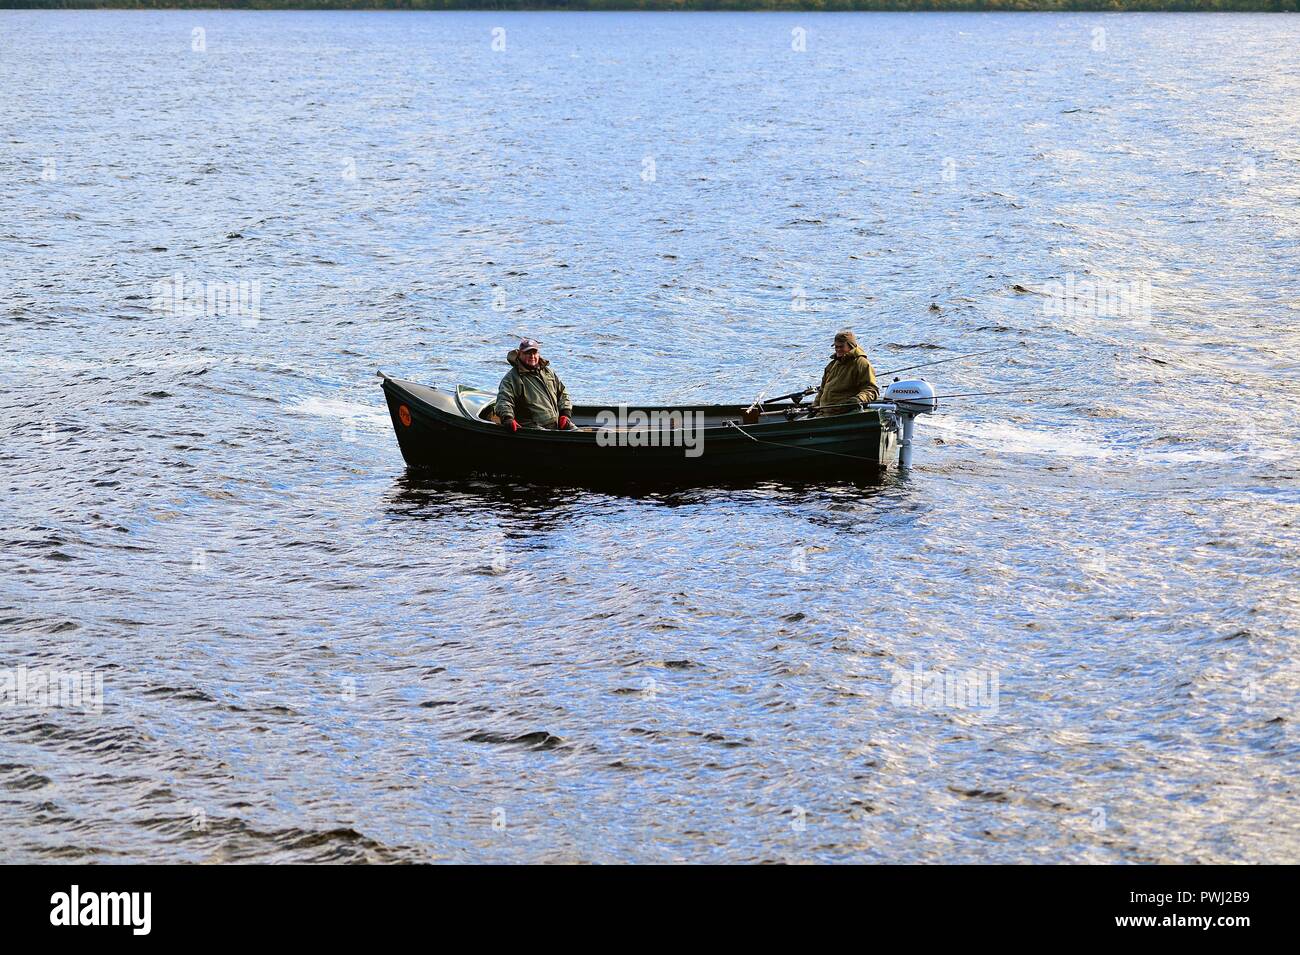 Drumnadrochit, Highlands, Scotland, United Kingdom. A pair of bundled-up fisherman testing the waters of Loch Ness. Tolling for Nessie, perhaps? Stock Photo